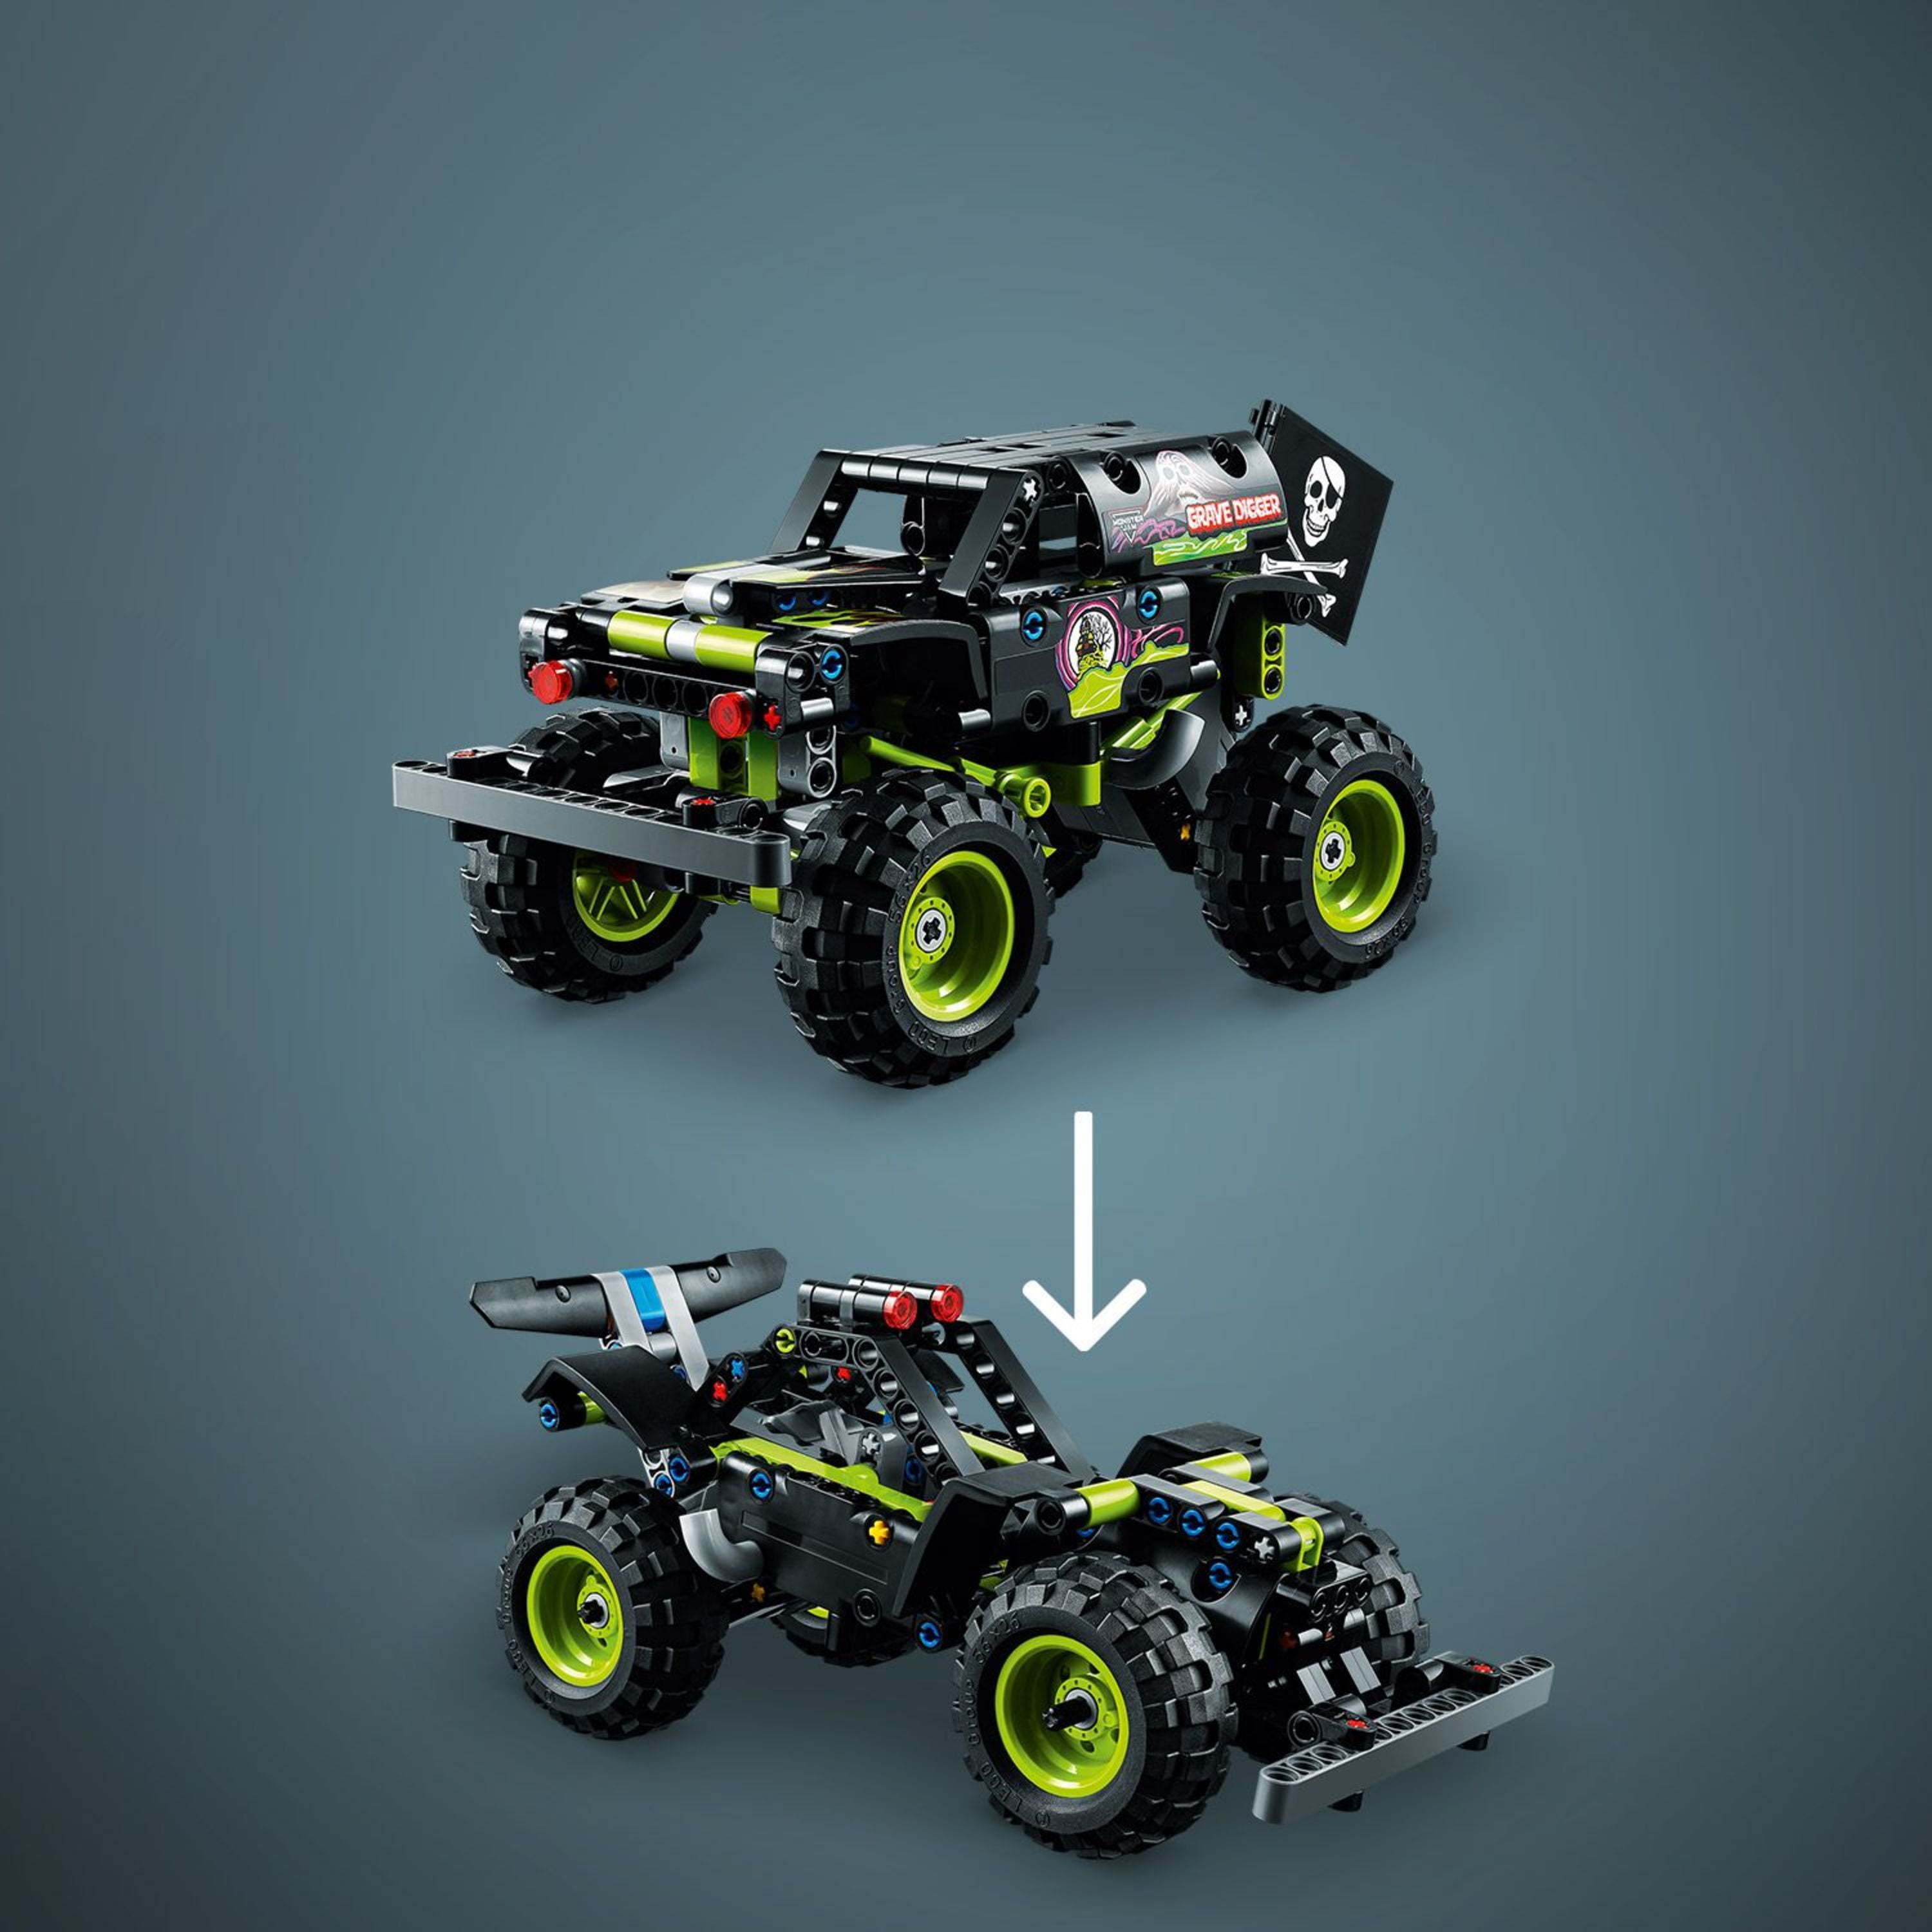 LEGO Technic Monster Jam Grave Digger 42118 Truck Toy to Buggy, Birthday for Monster Truck Fans, Kids, Boys and Girls 7 plus Years Old - Walmart.com